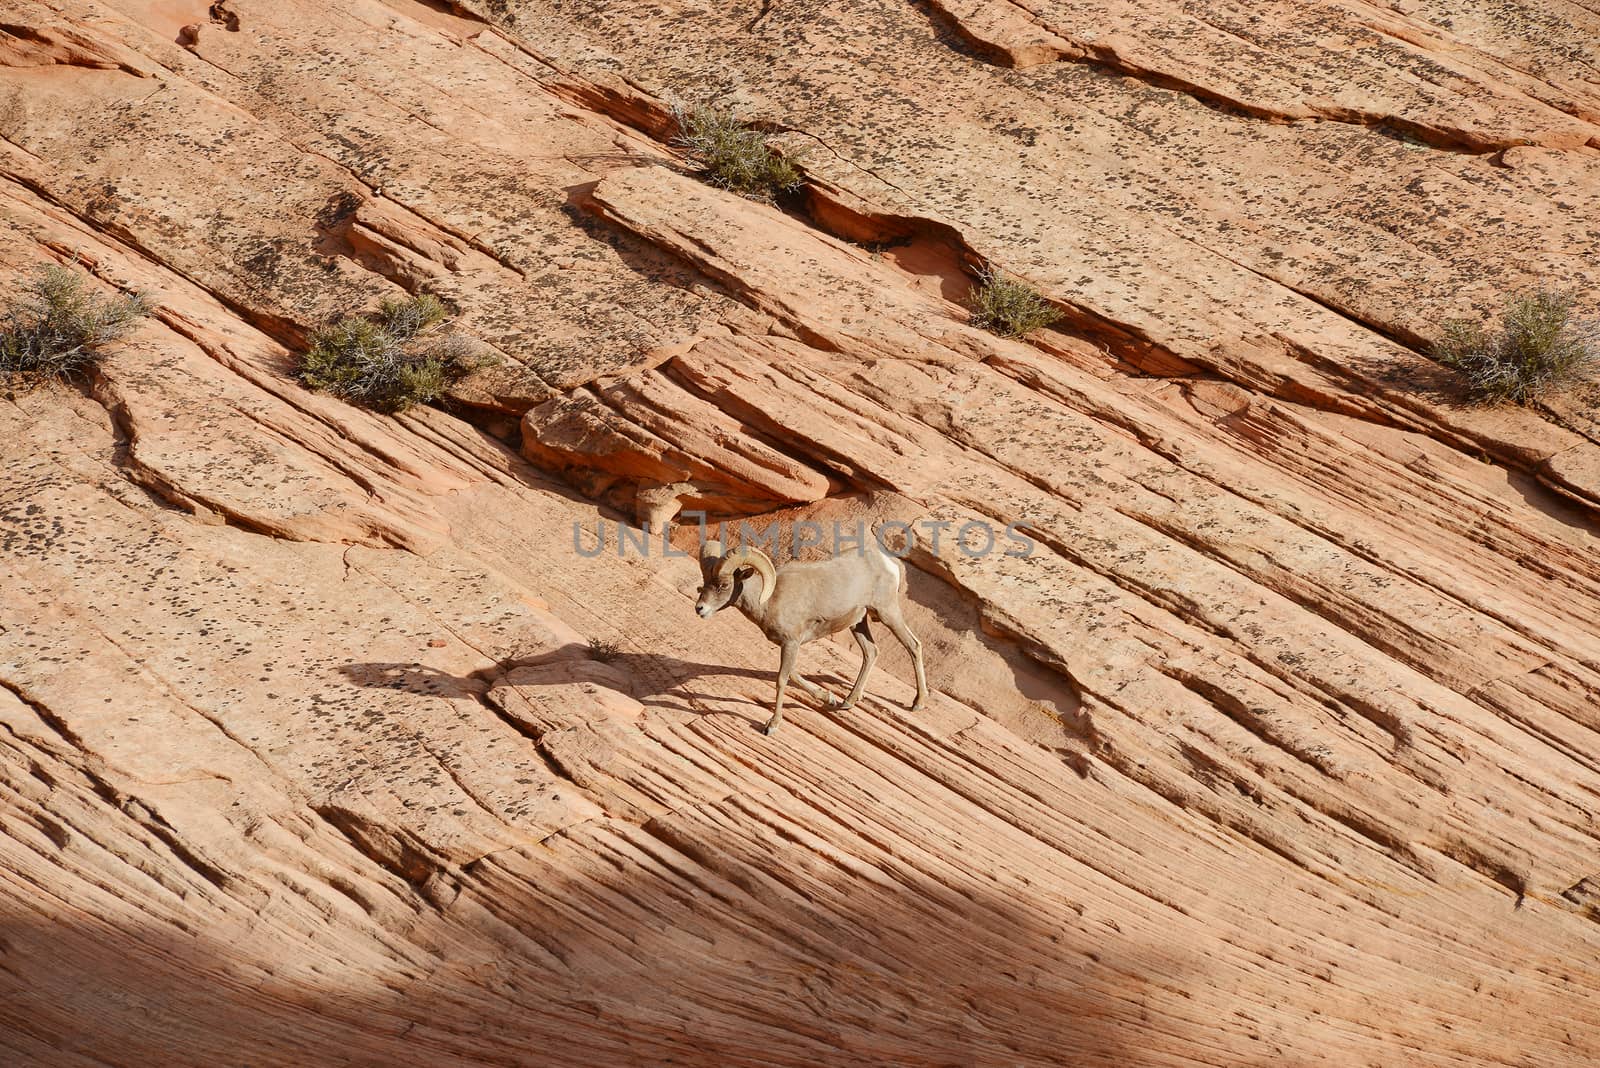 big horn sheep on a sandstone rock in east side of zion national park